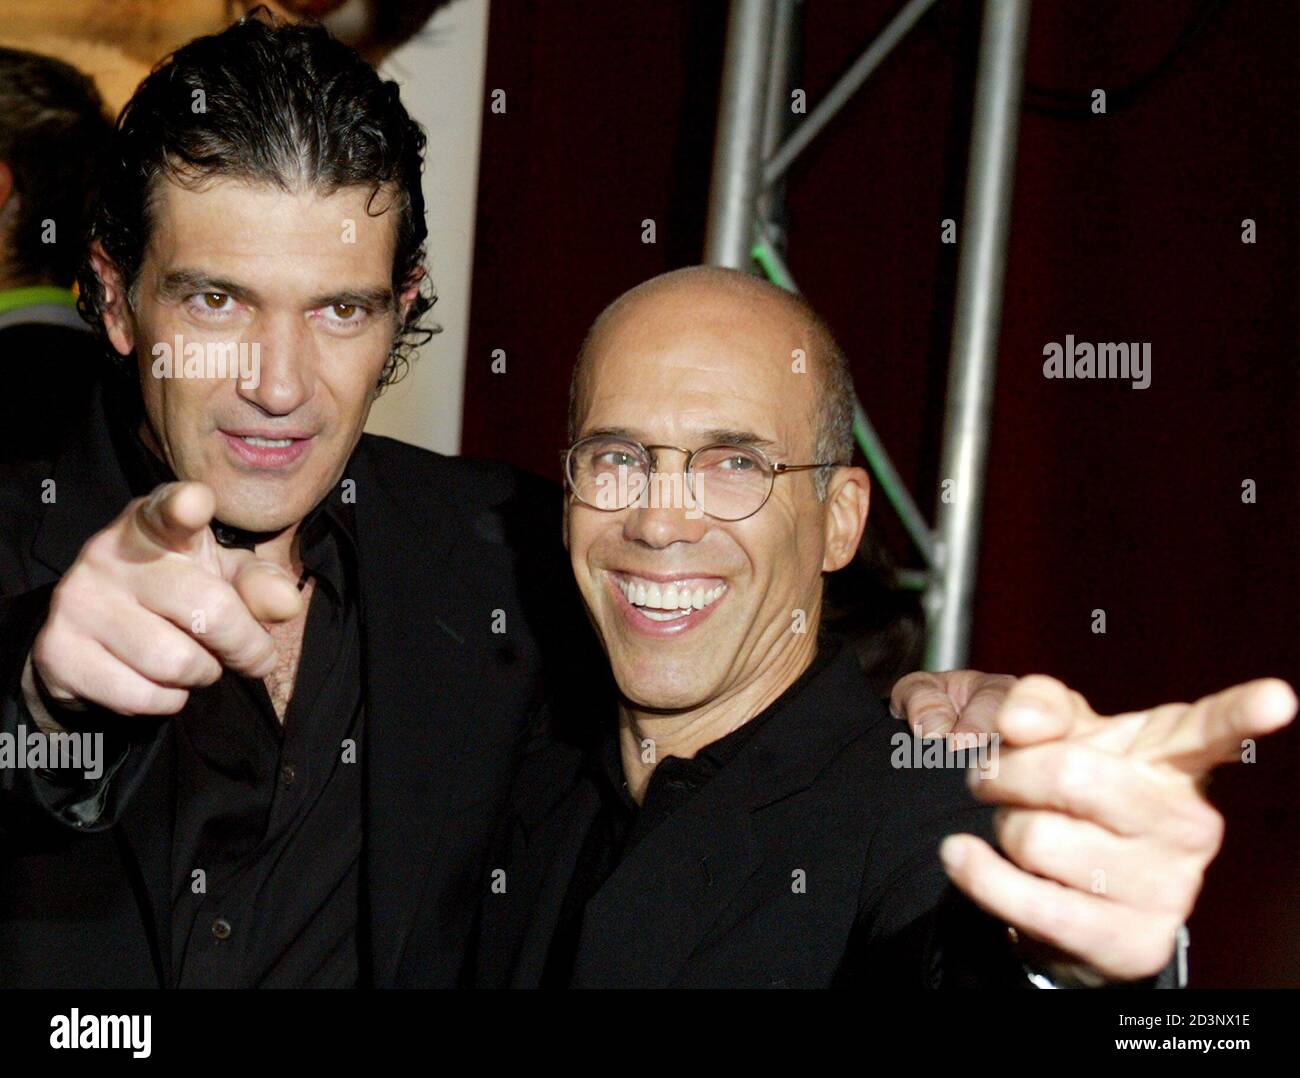 EXECUTIVE PRODUCER OF SHREK 2 JEFFREY KATZENBERG POSES WITH ANTONIO BANDERAS AT THE AUSTRALIAN PREMIERE OF SHREK 2 IN SYDNEY.  Antonio Banderas (L) and executive producer of Shrek 2 Jeffrey Katzenberg (R) pose for photographs before the Australian premiere of Shrek 2 at a theatre in Sydney June 9, 2004. The animation hit follows on from the first movie but with added stars voicing for the animated characters. REUTERS/Will Burgess Stock Photo